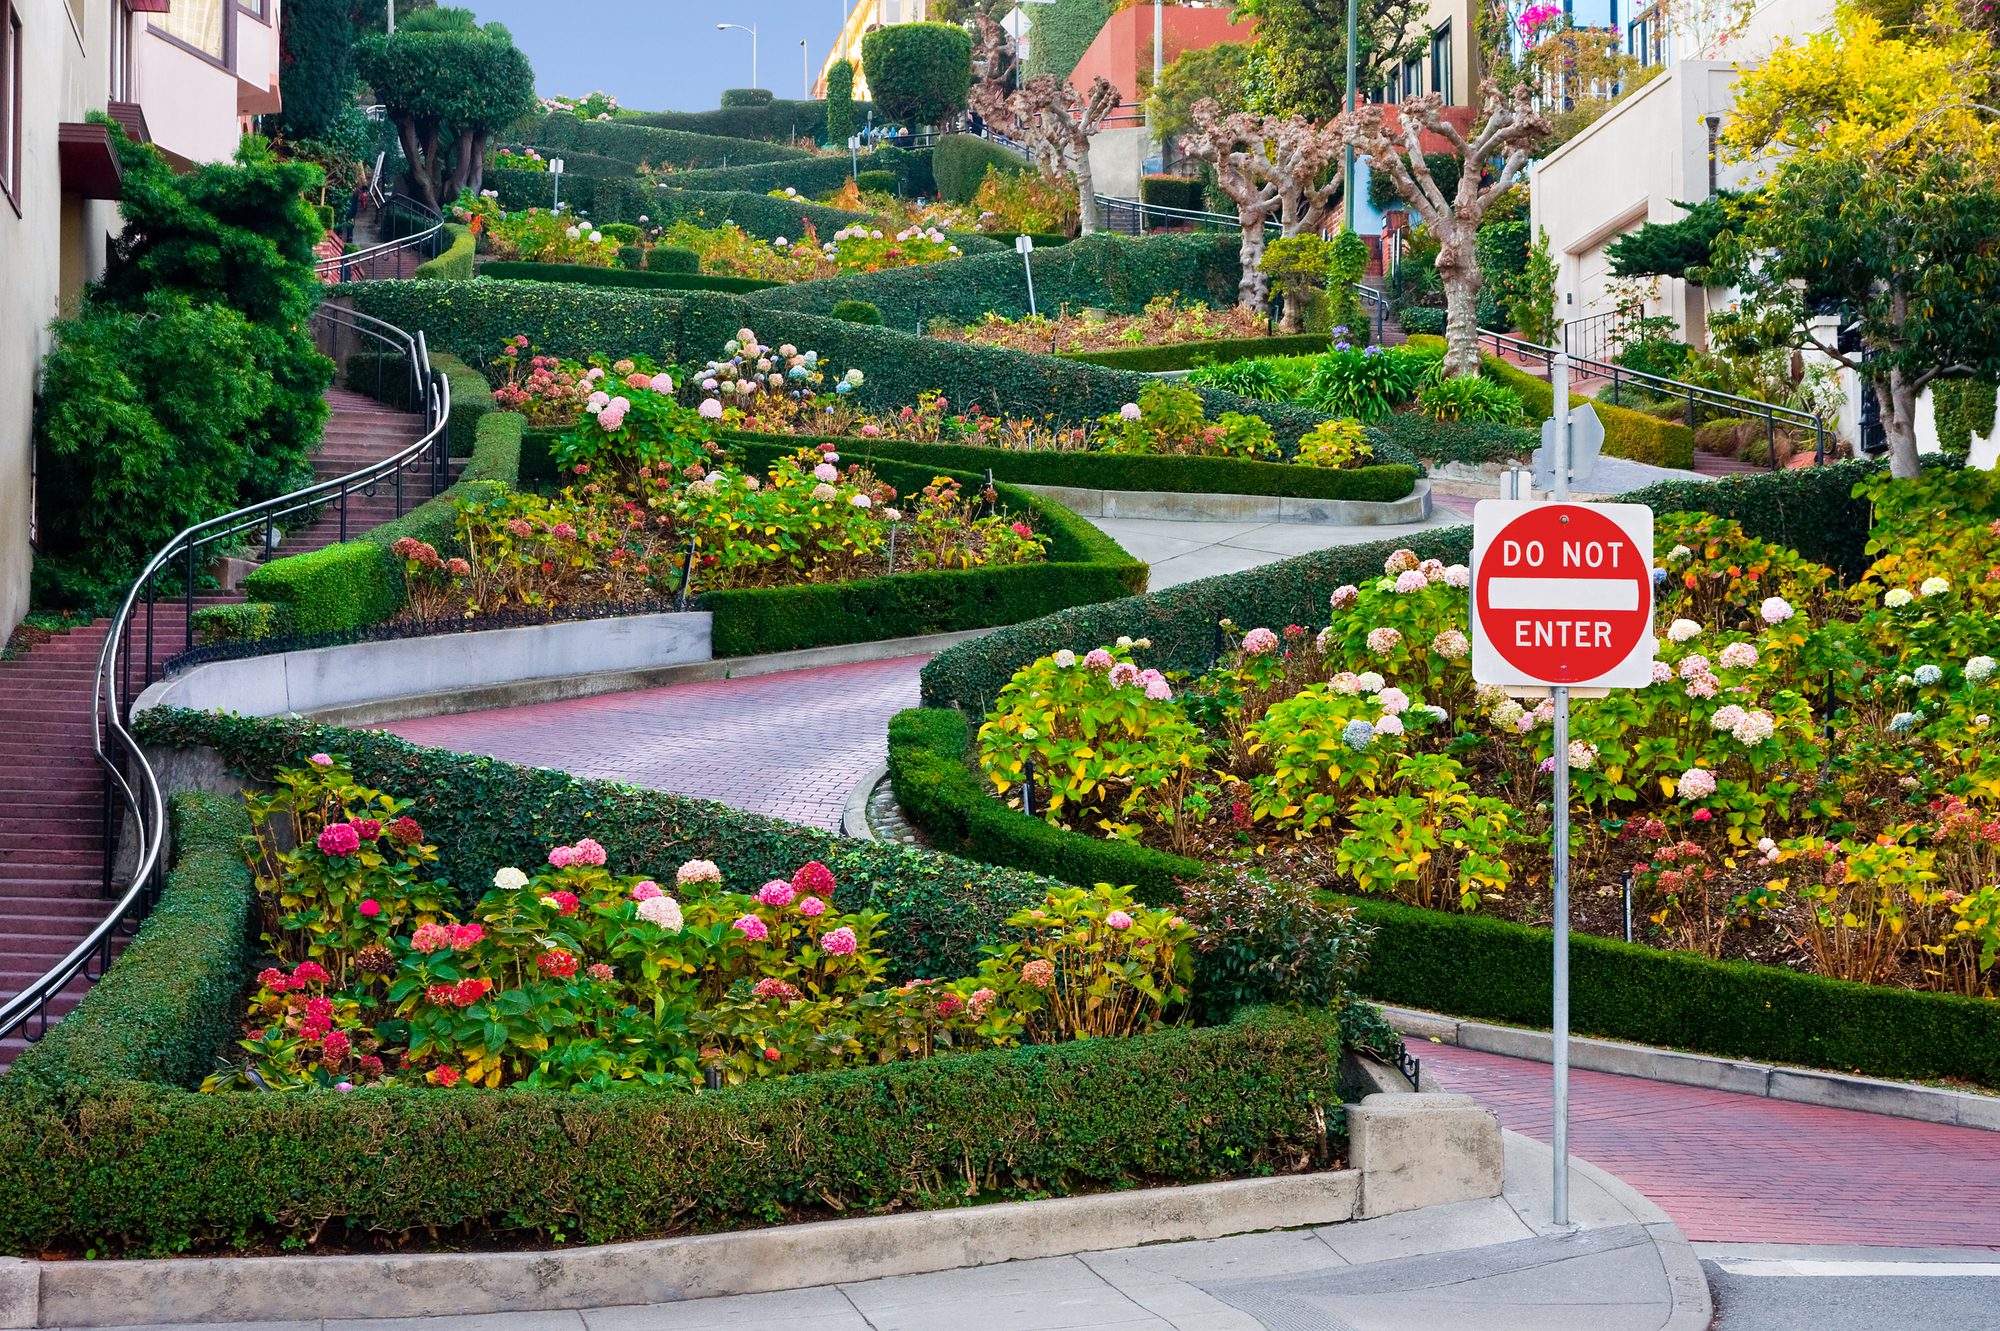 Come visit one of O'Grady Plumbing's favorite local attractions - Lombard Street! The Crookedest Street in the World!